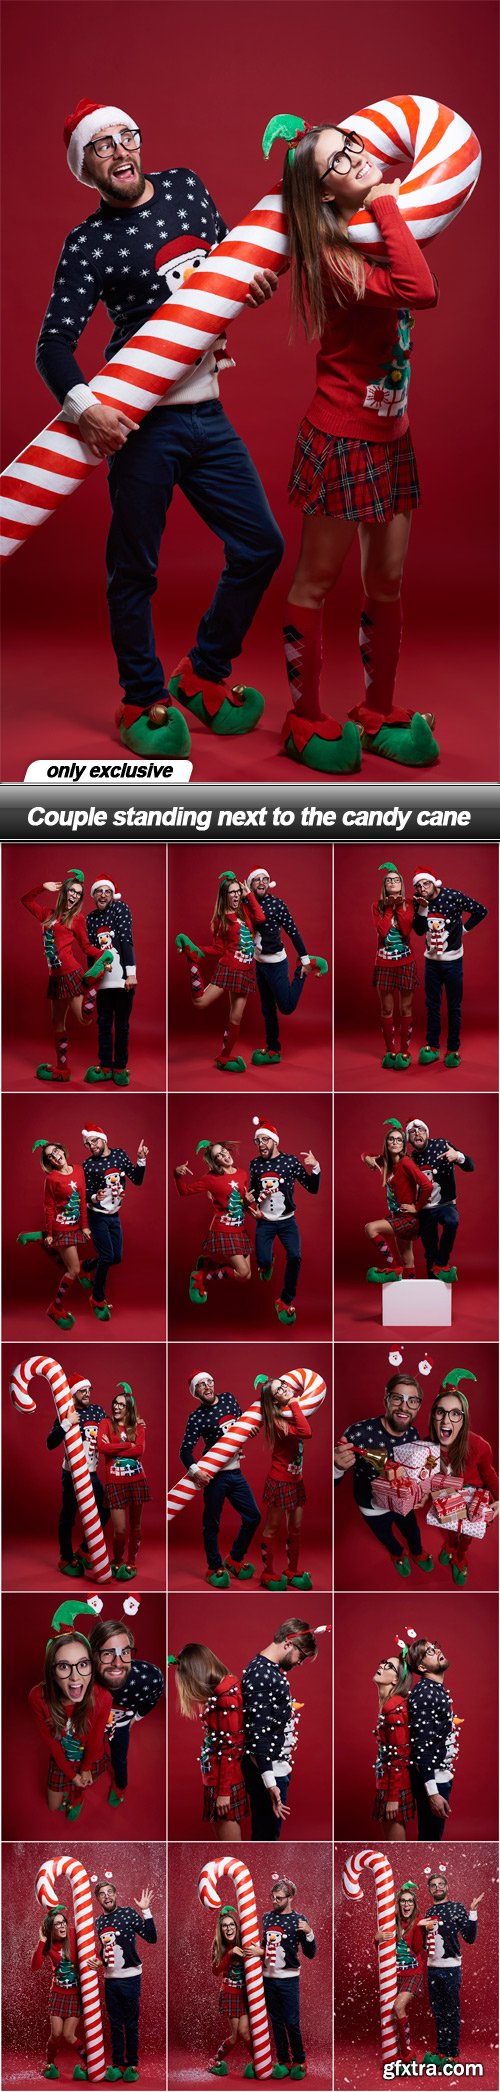 Couple standing next to the candy cane - 15 UHQ JPEG